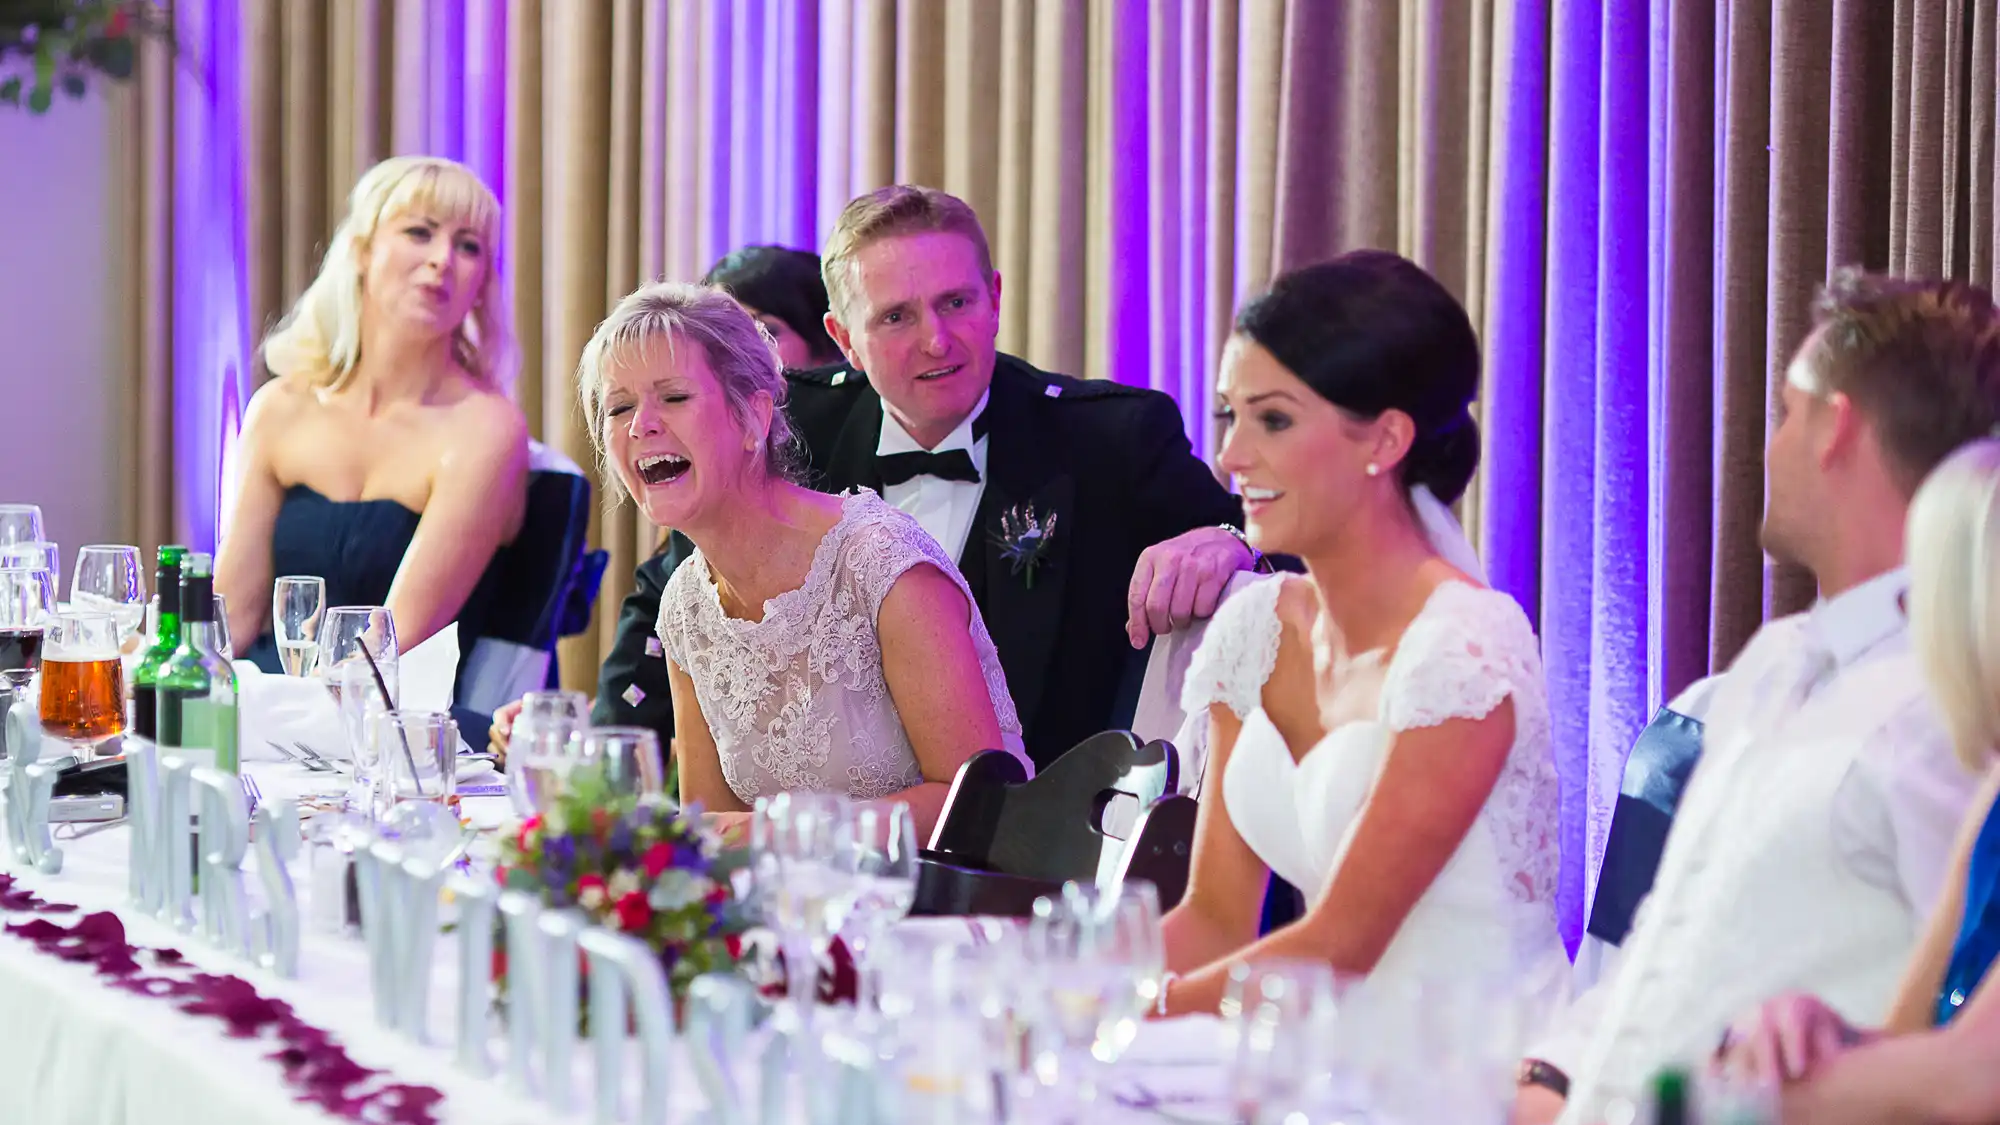 A wedding reception scene with guests sitting at a decorated table, a bride in white conversing with a woman laughing, and a man in a military uniform smiling behind them.